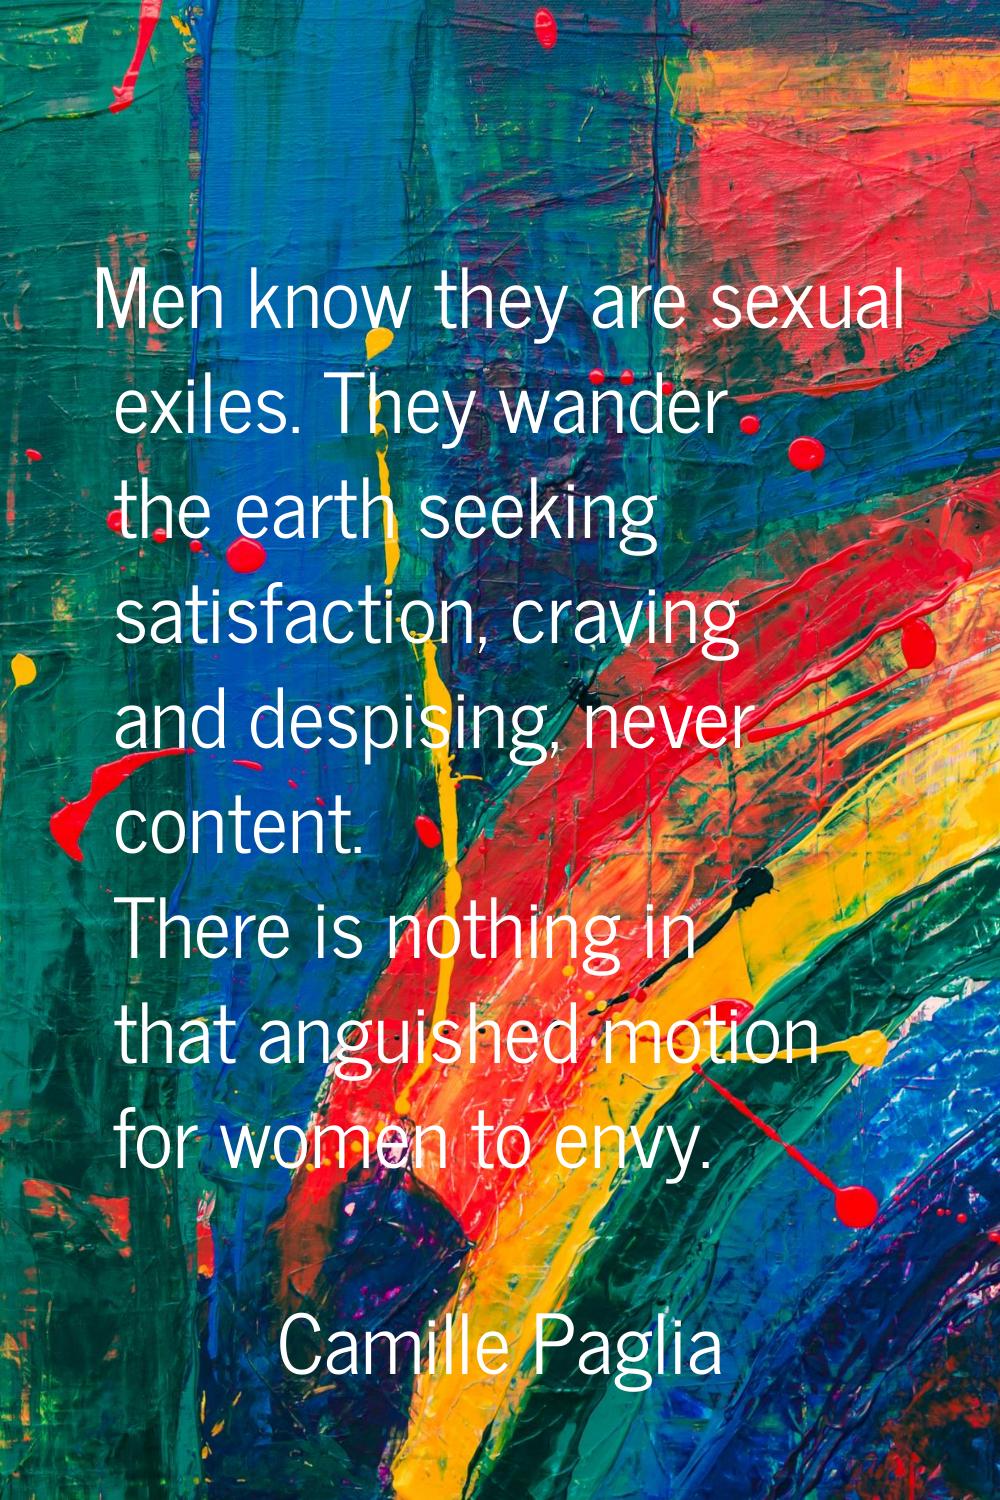 Men know they are sexual exiles. They wander the earth seeking satisfaction, craving and despising,